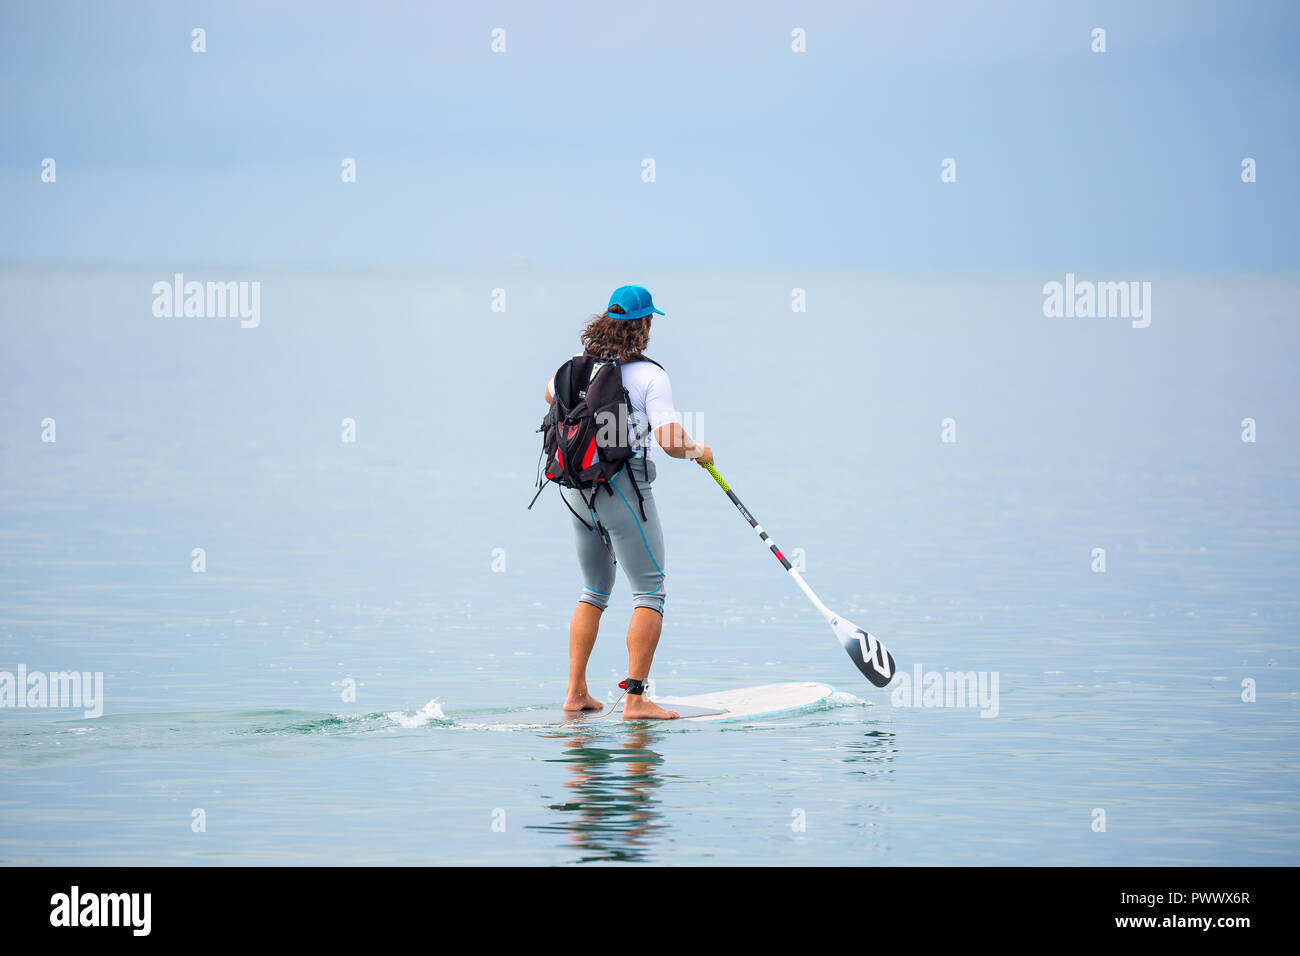 Caucasian male, rear view, isolated in sea, enjoying popular outdoor activity, stand up paddle boarding (SUP surfing) on summer holiday, Wales UK. Stock Photo